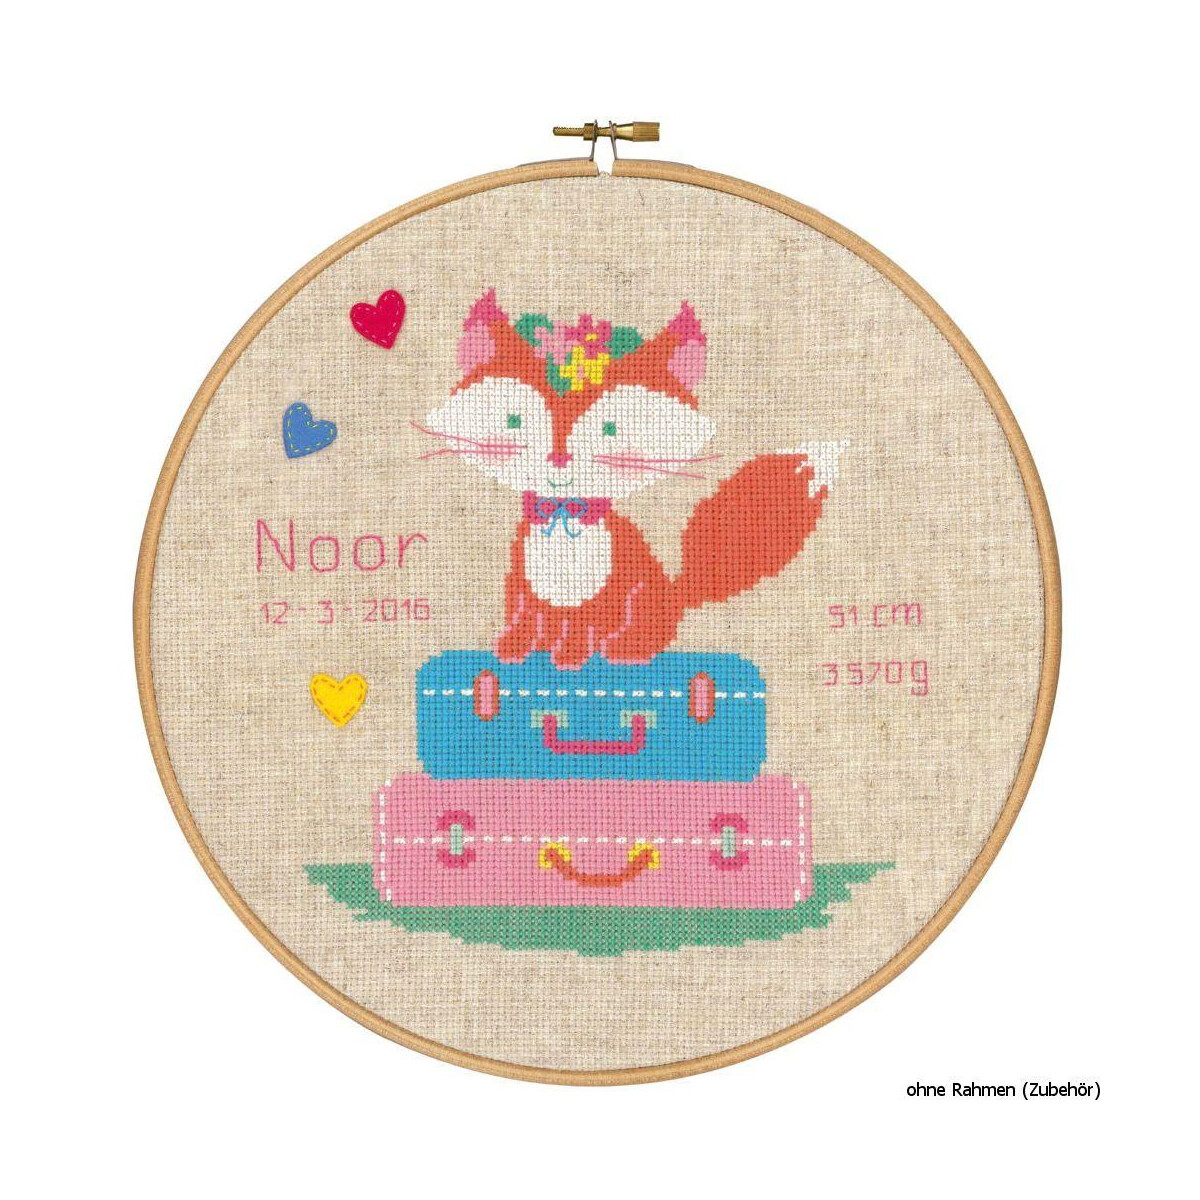 Vervaco cross stitch kit with Hoop counted "Fox on...